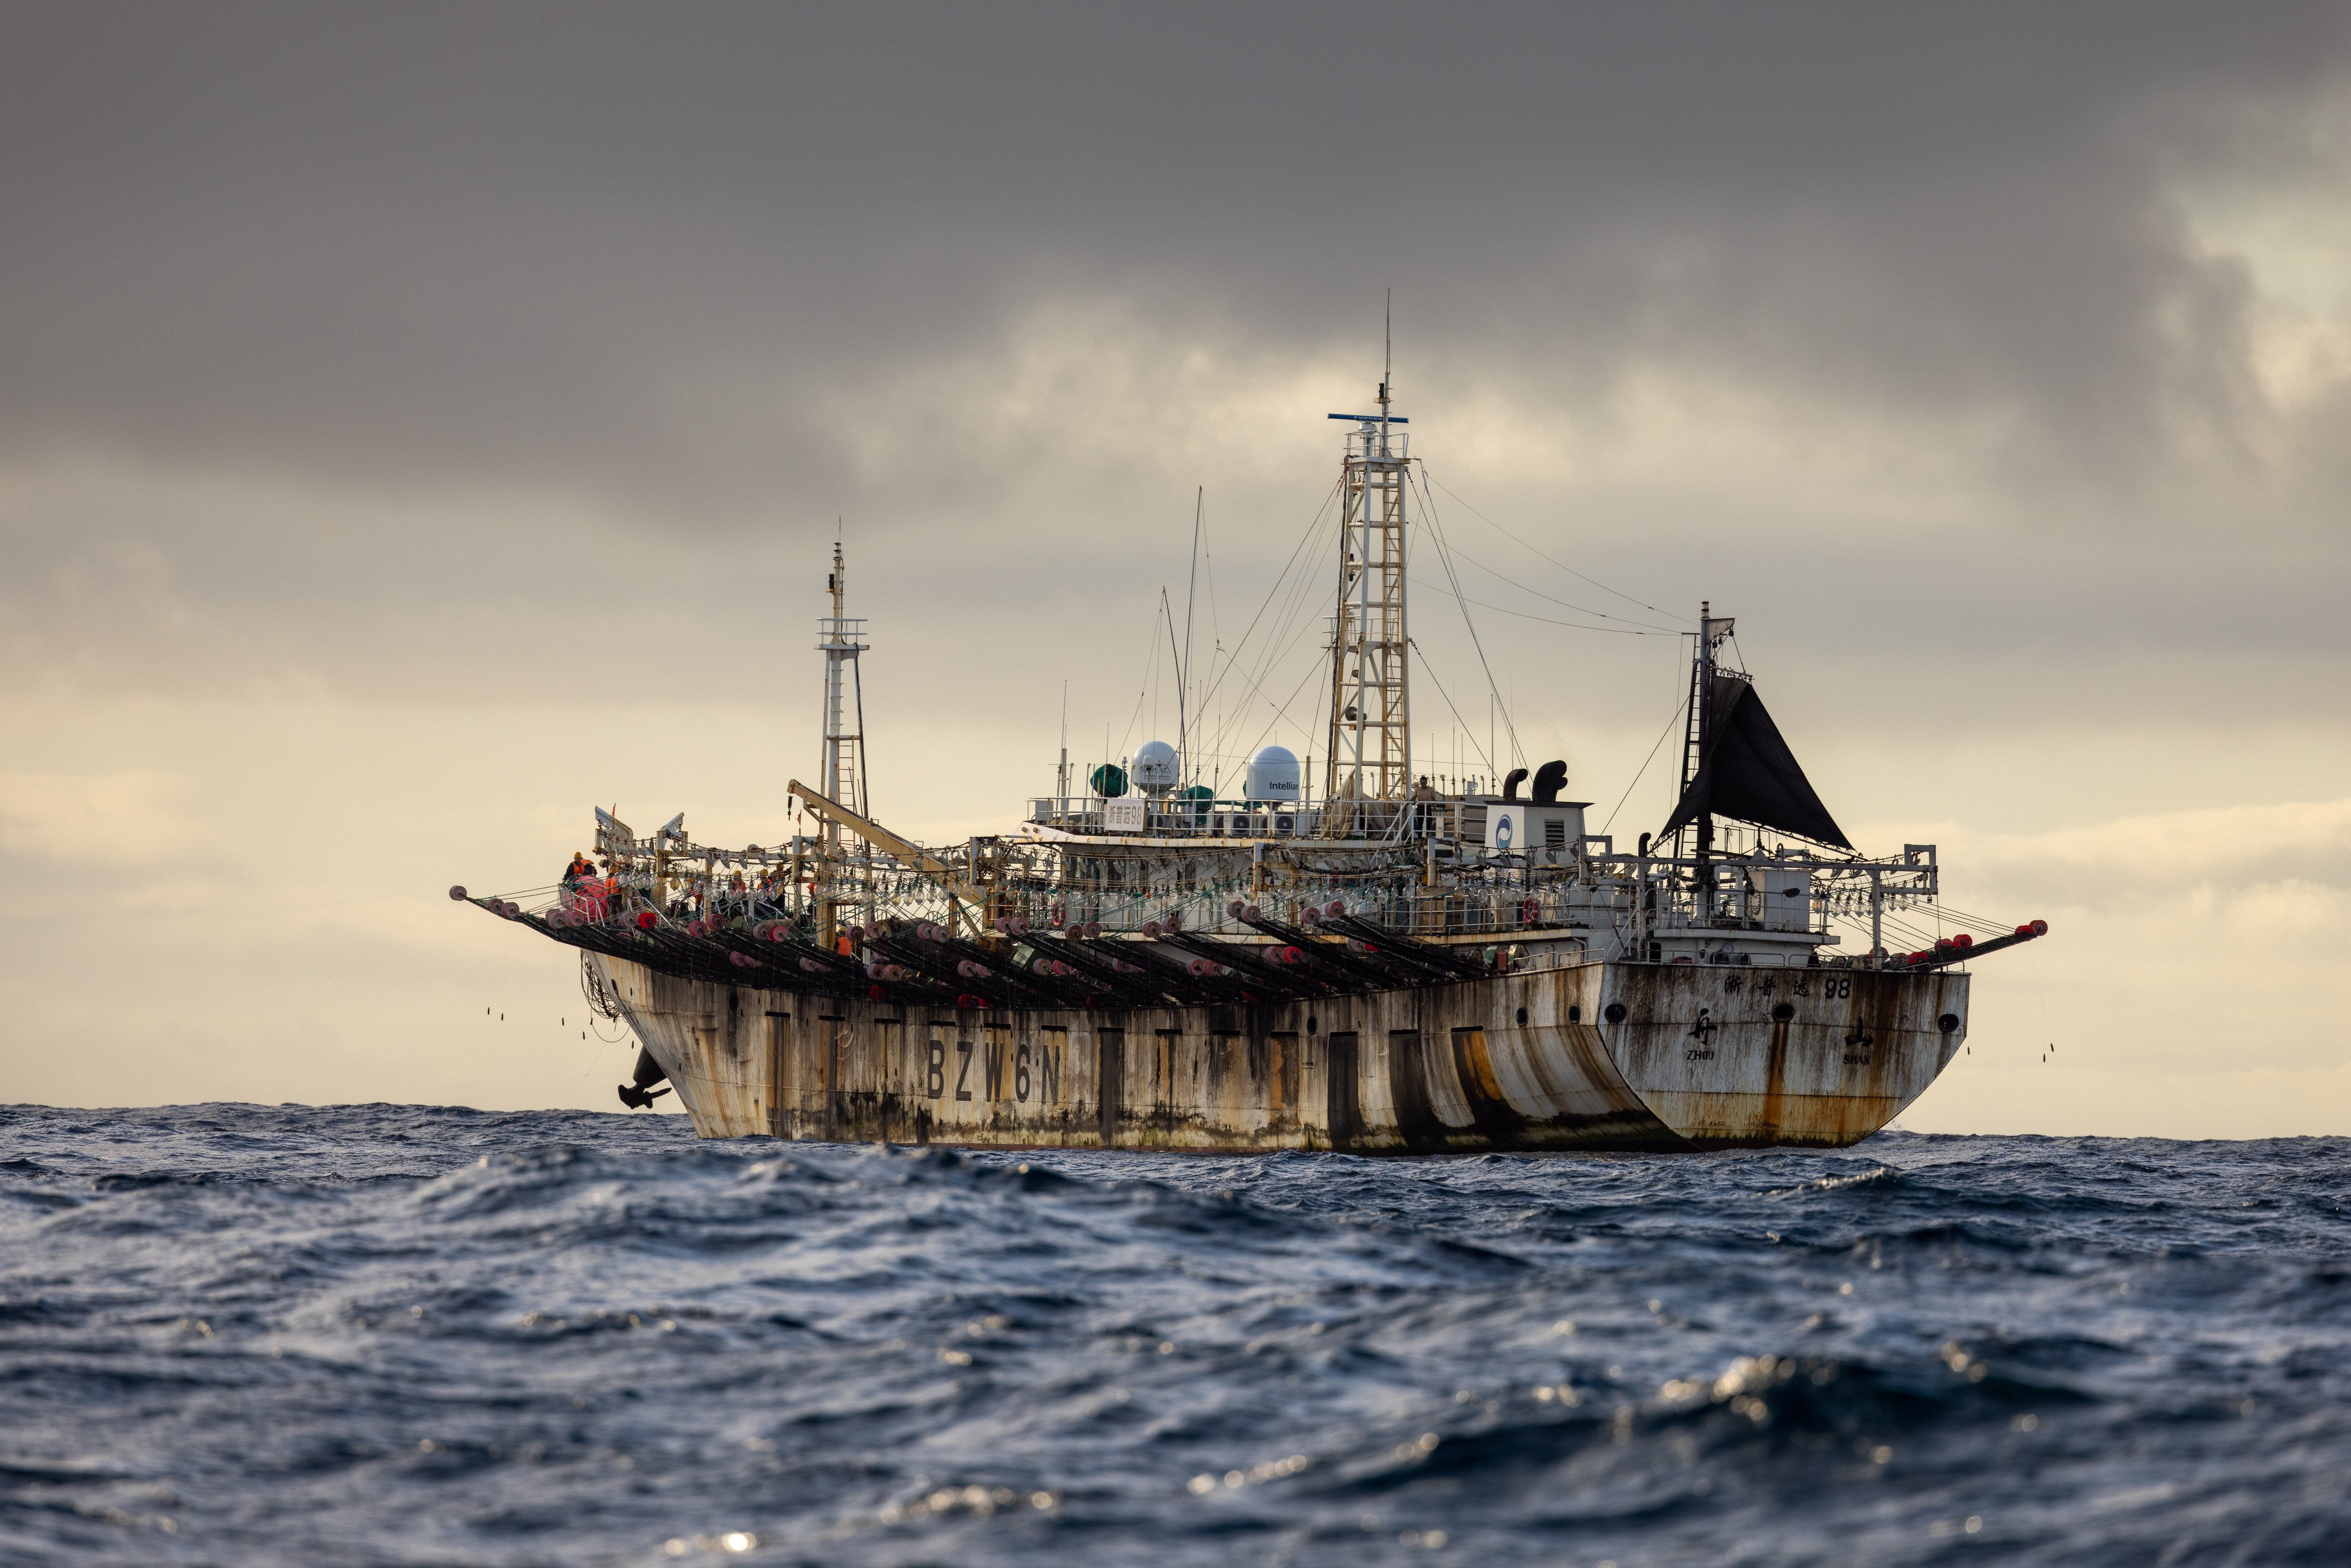 A Chinese squid vessel. China has become the undisputed global seafood superpower, but exploitation and physical abuse and neglect of deckhands, sometimes leading to death, is common. Photo: The Outlaw Ocean Project/Ben Blankenship